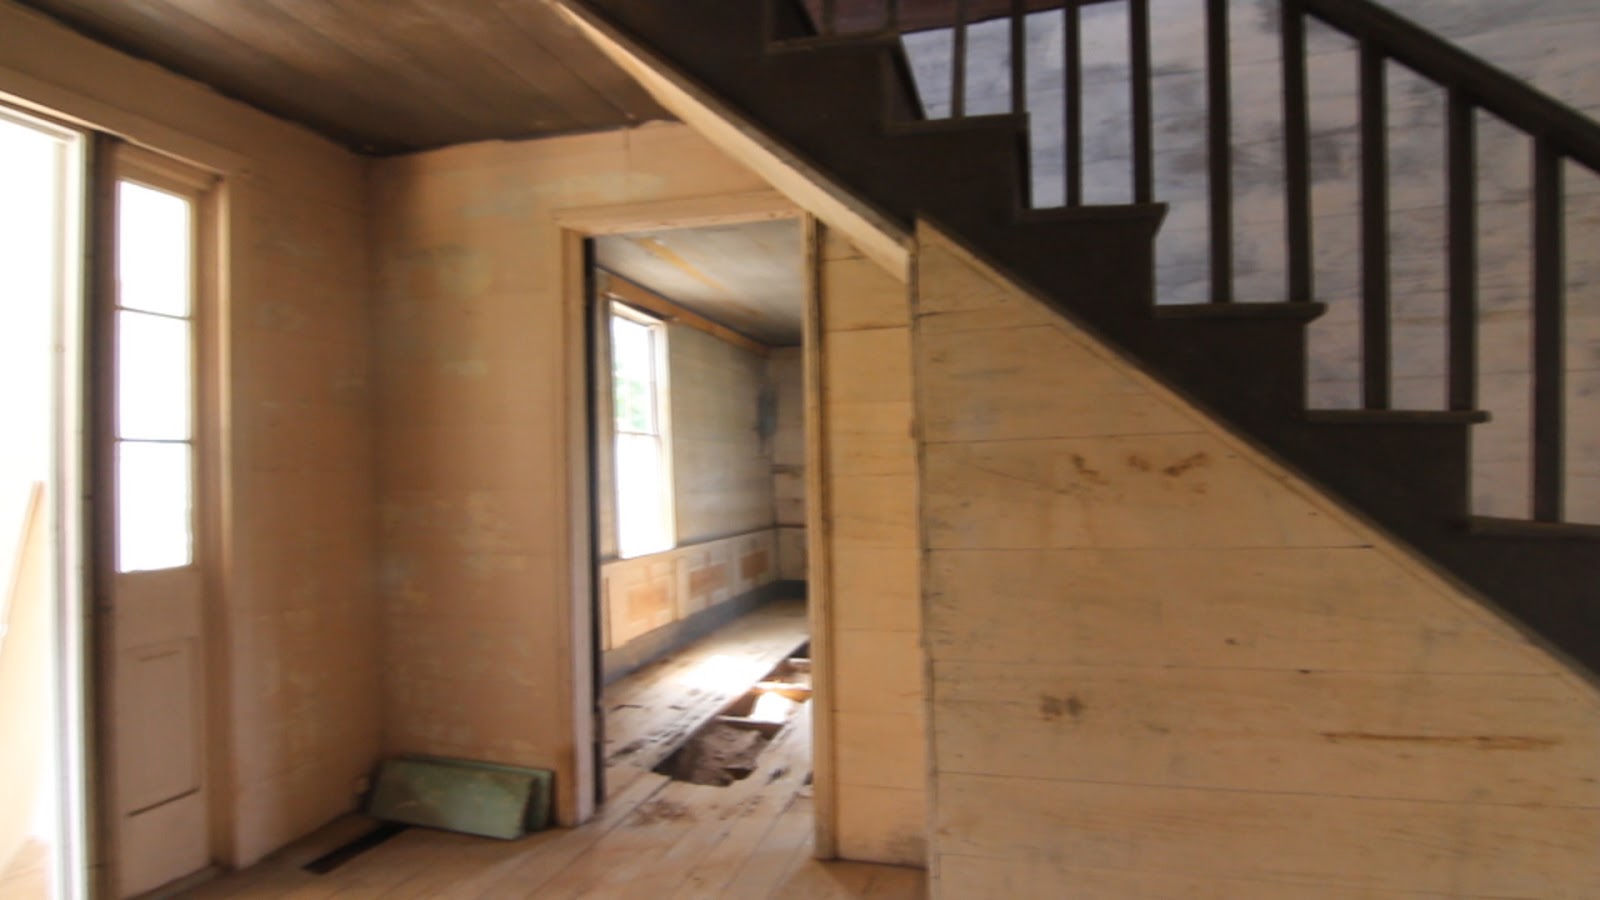 The Ledford Colley House A Level House With New Floor Joists And